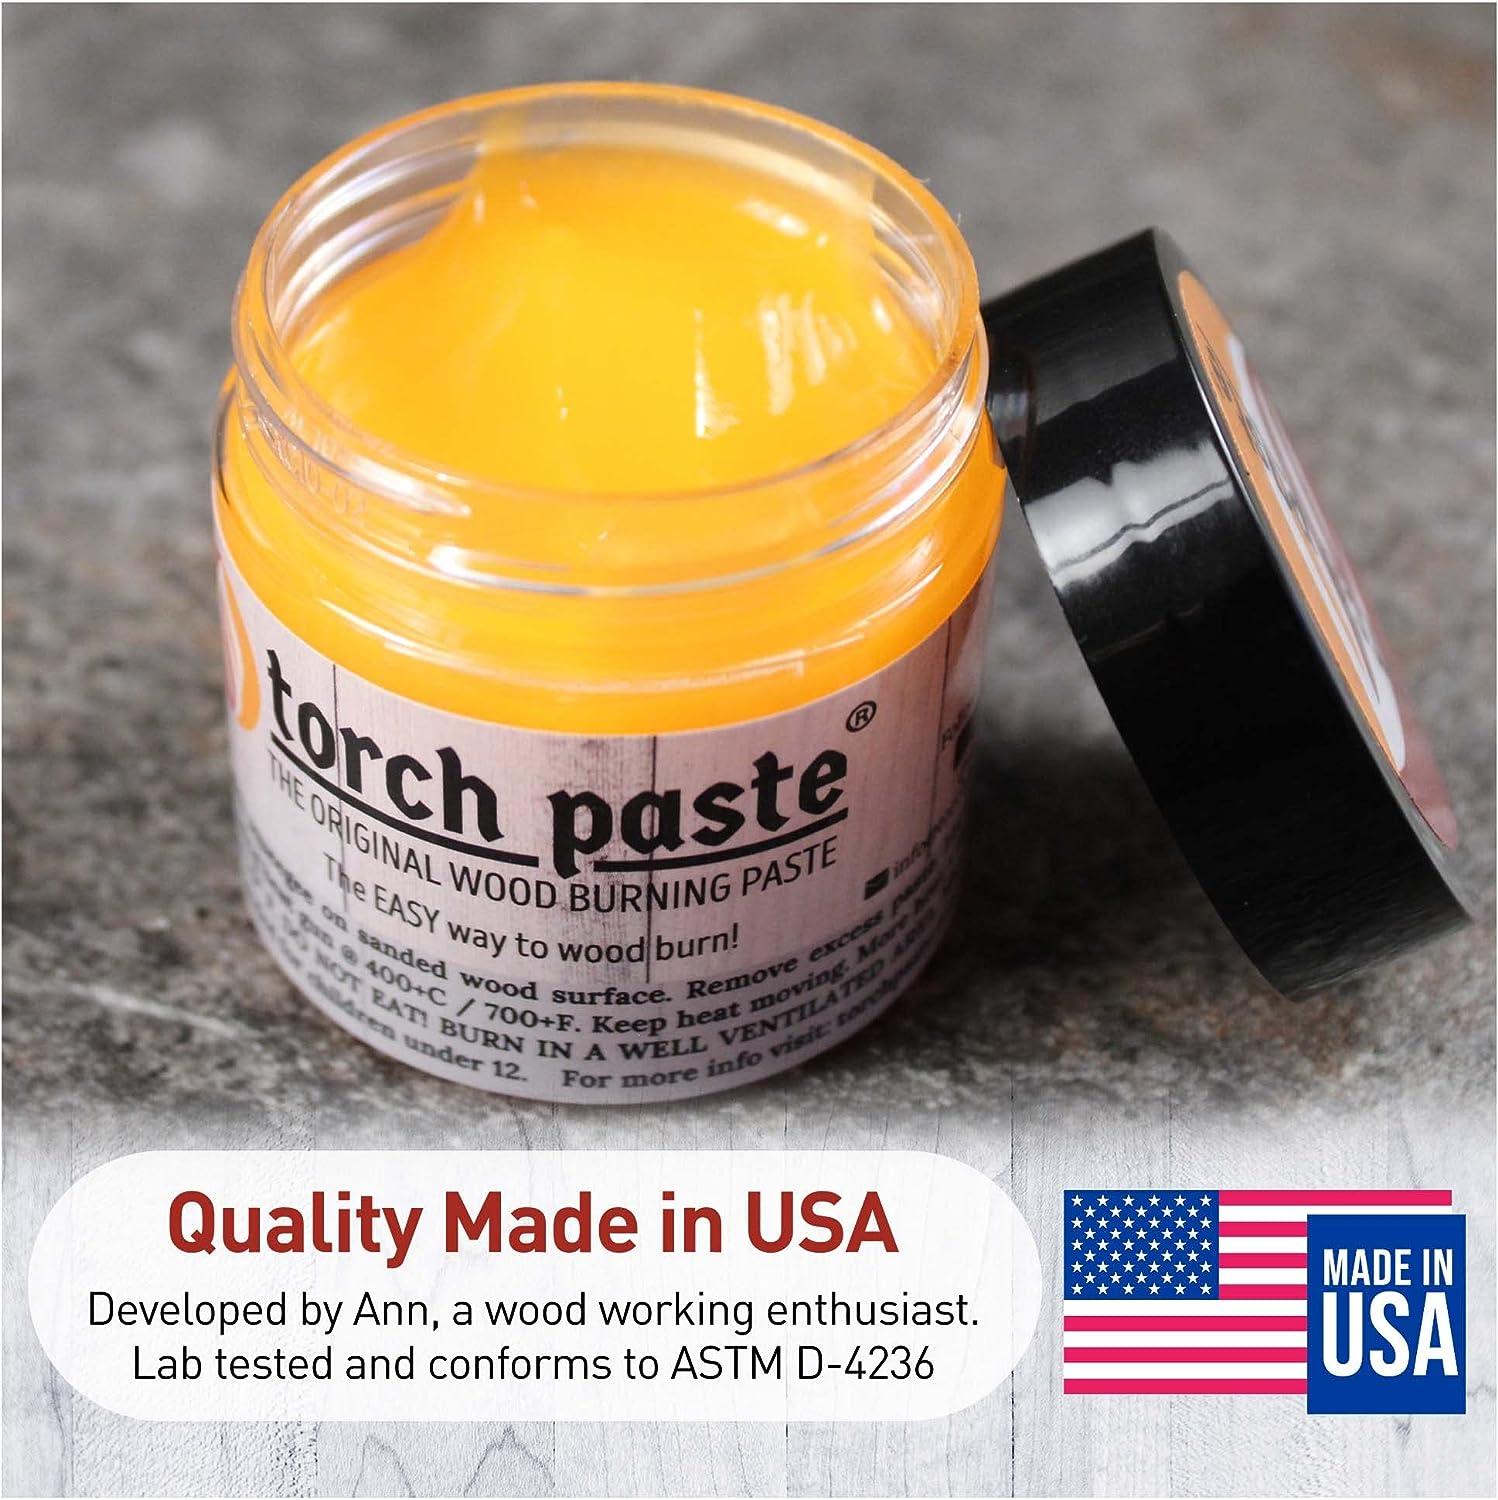 Torch Paste - The Original Wood Burning Paste Since 2020